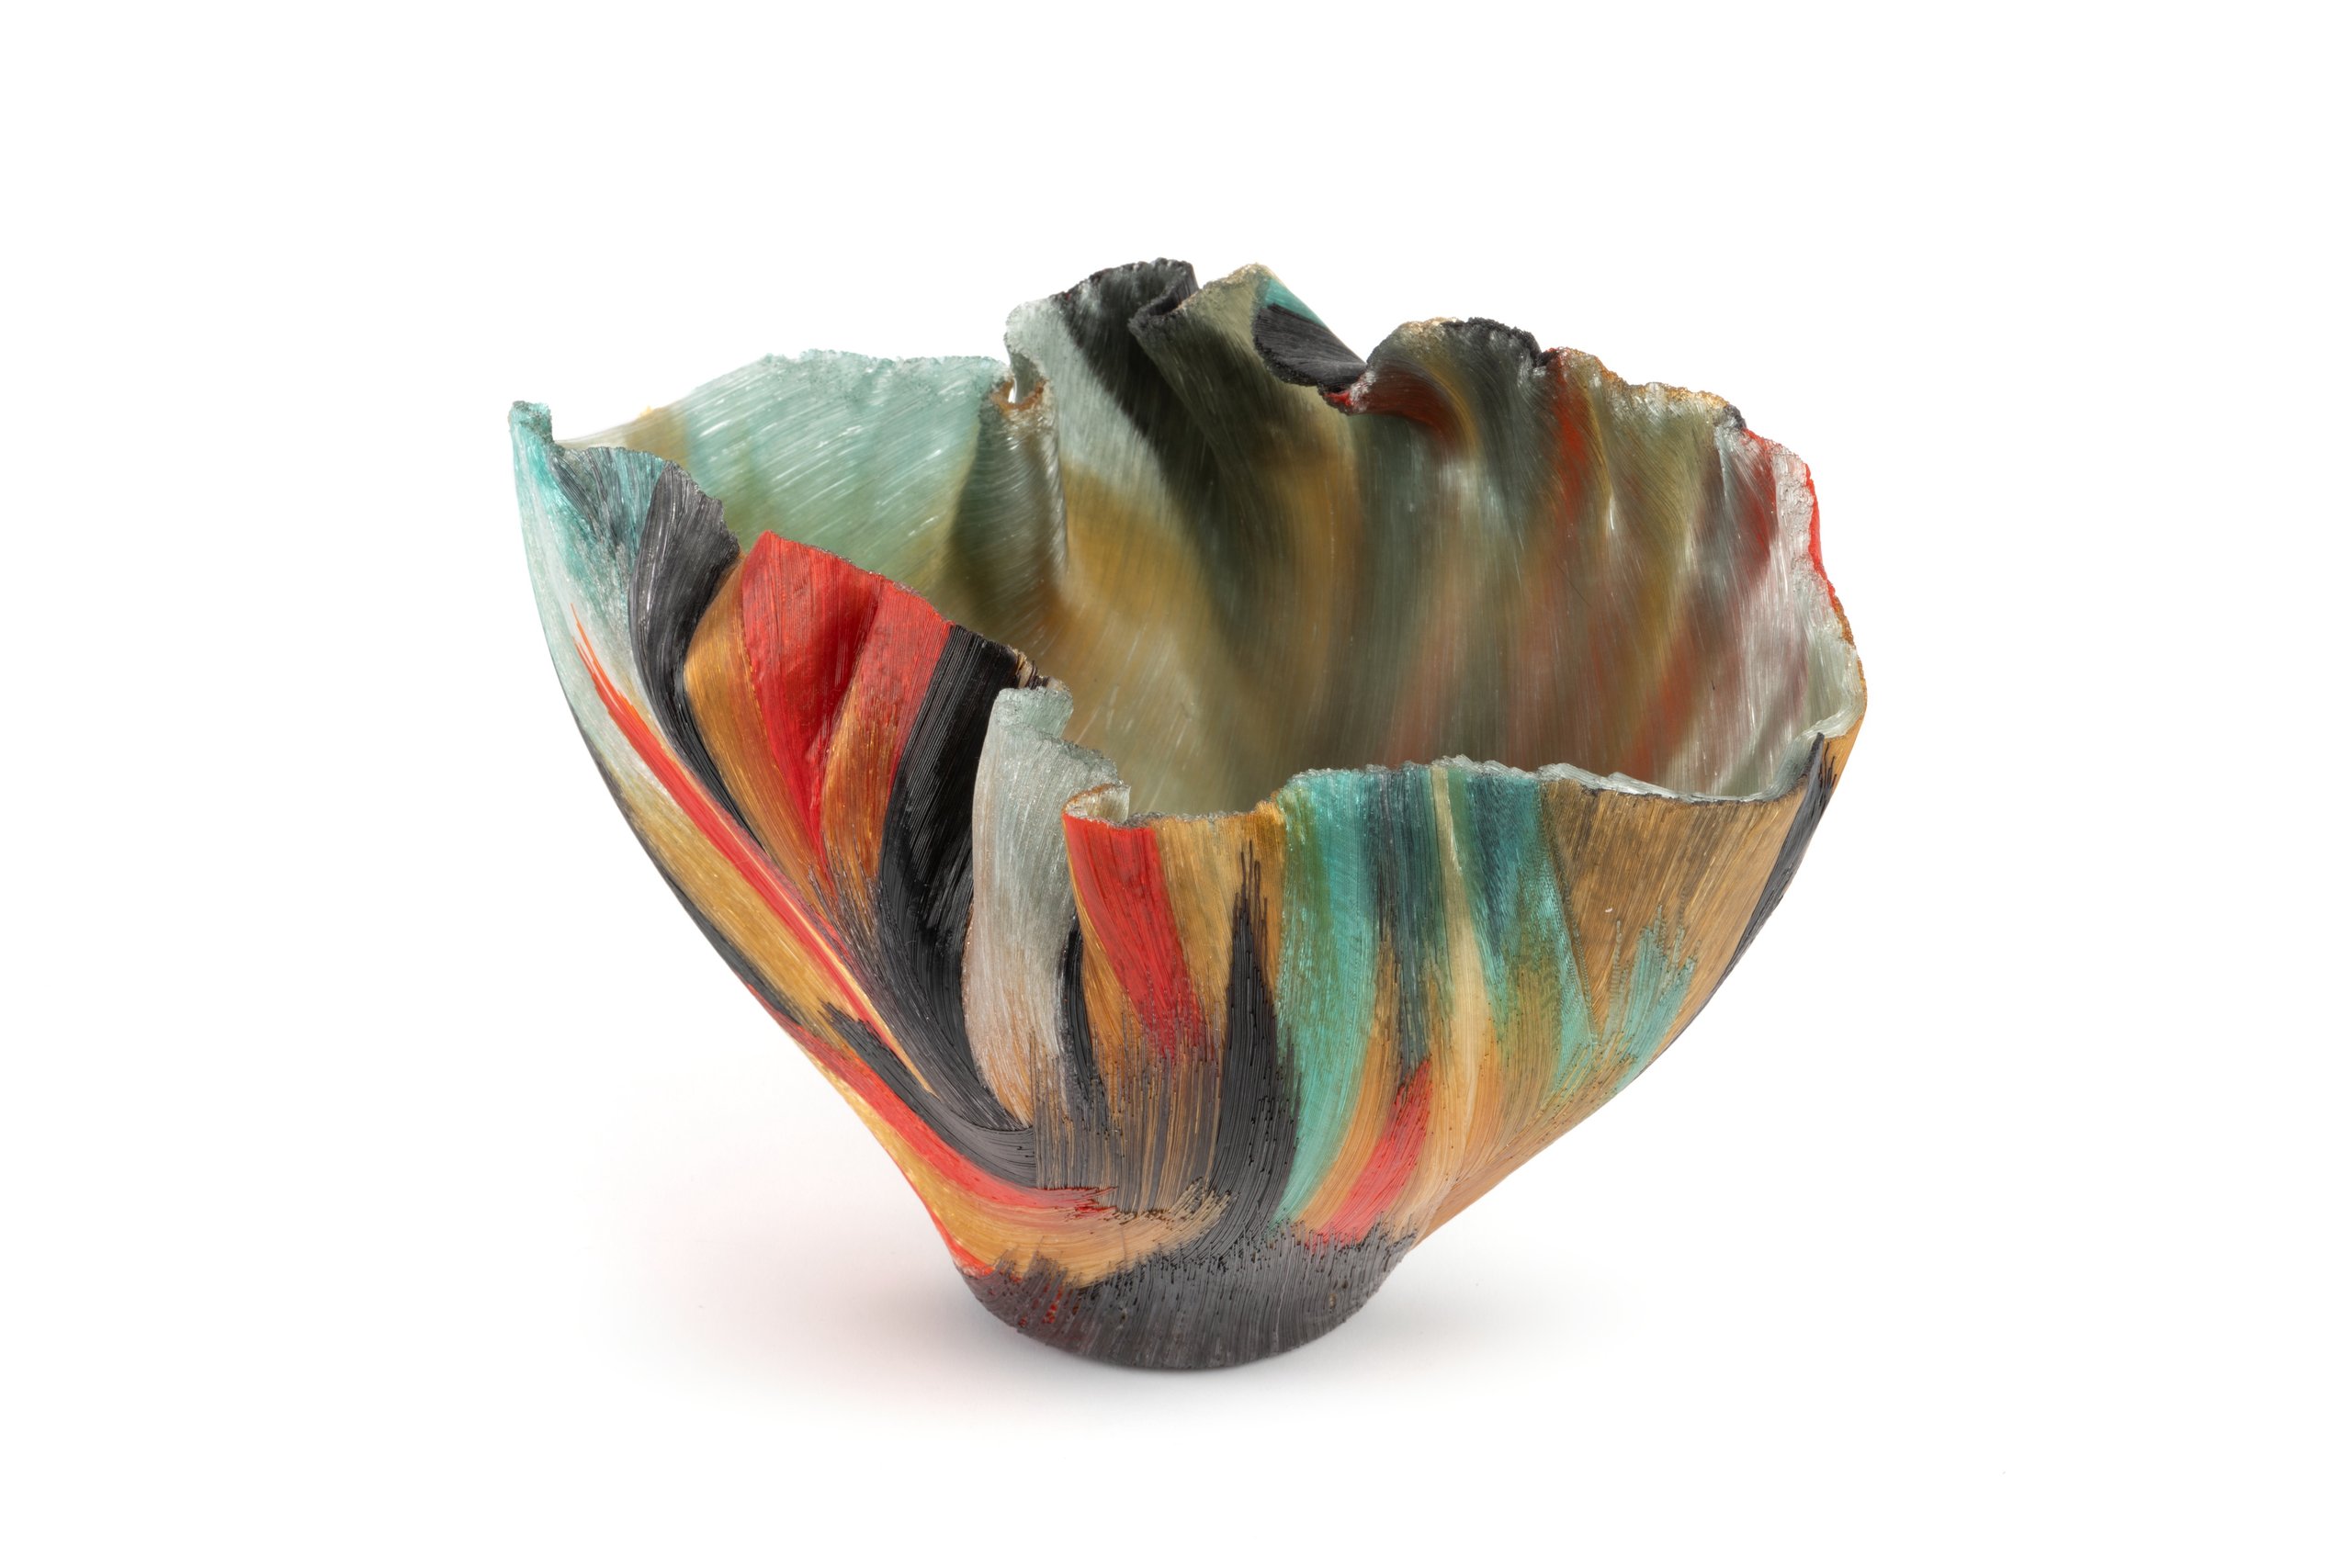 'Devilish chaos' bowl by Toots Zynsky